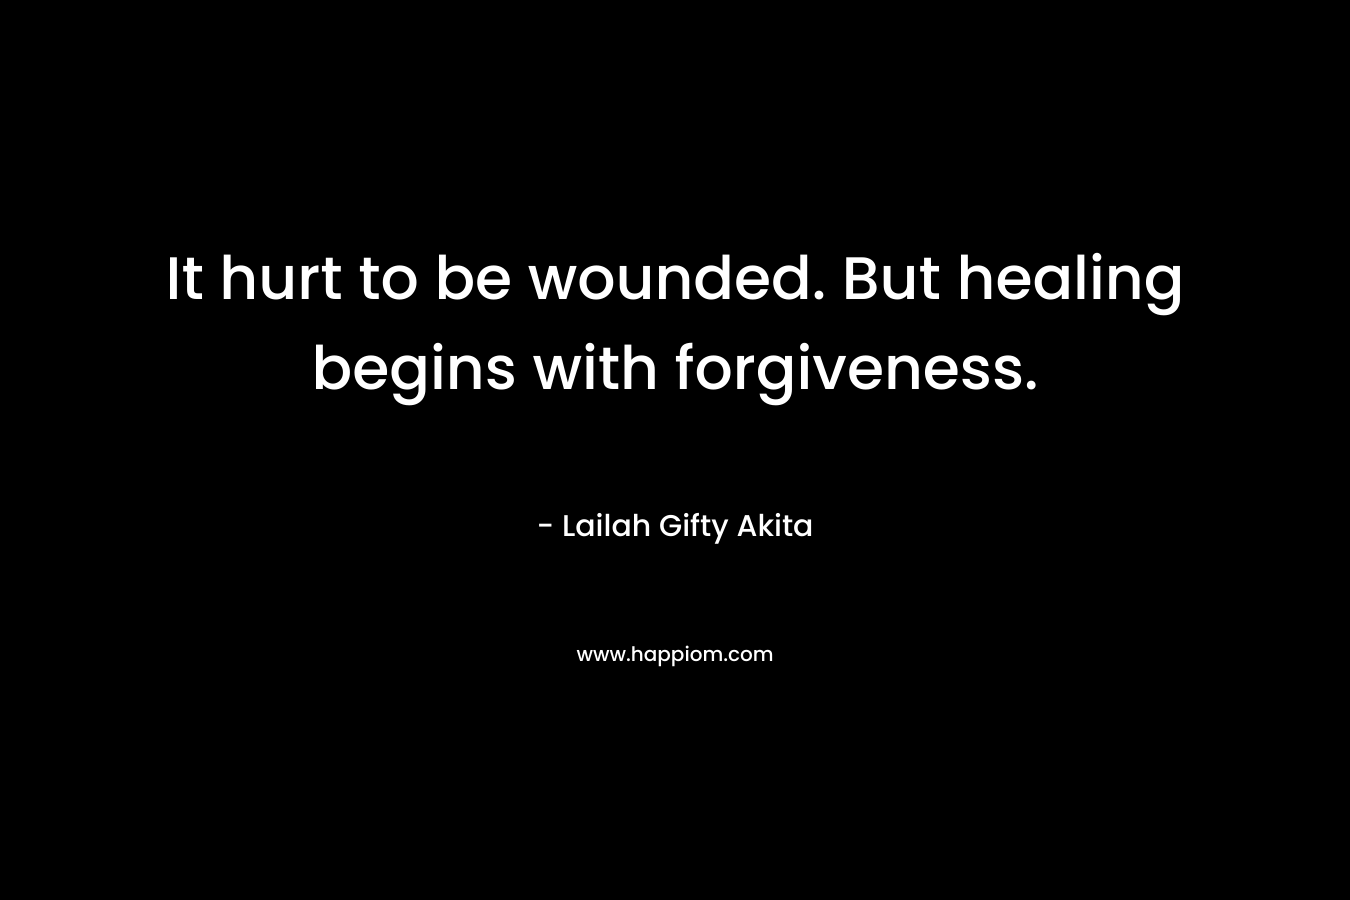 It hurt to be wounded. But healing begins with forgiveness.